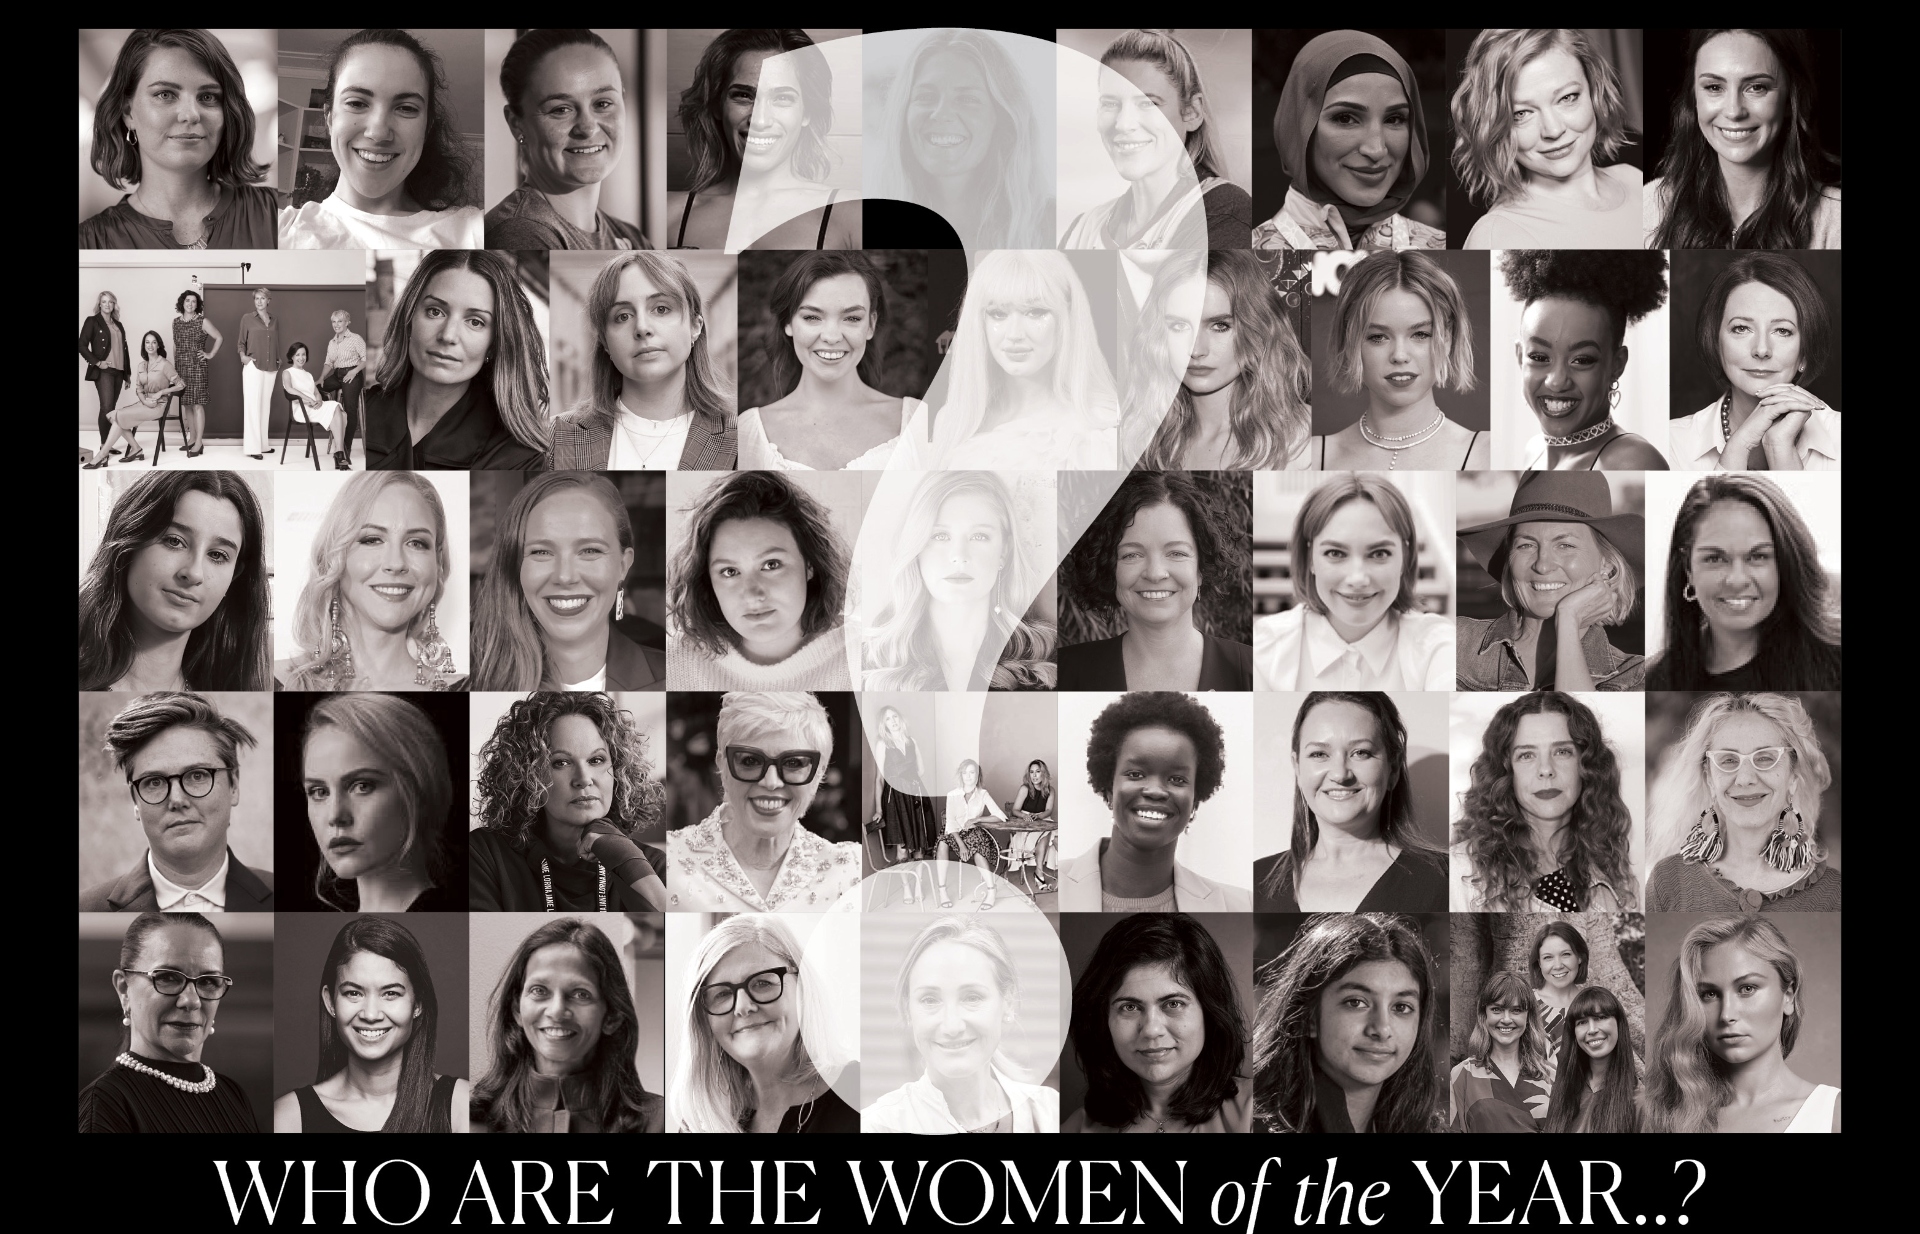 Marie Claire Women of the Year Awards: Meet The Nominees